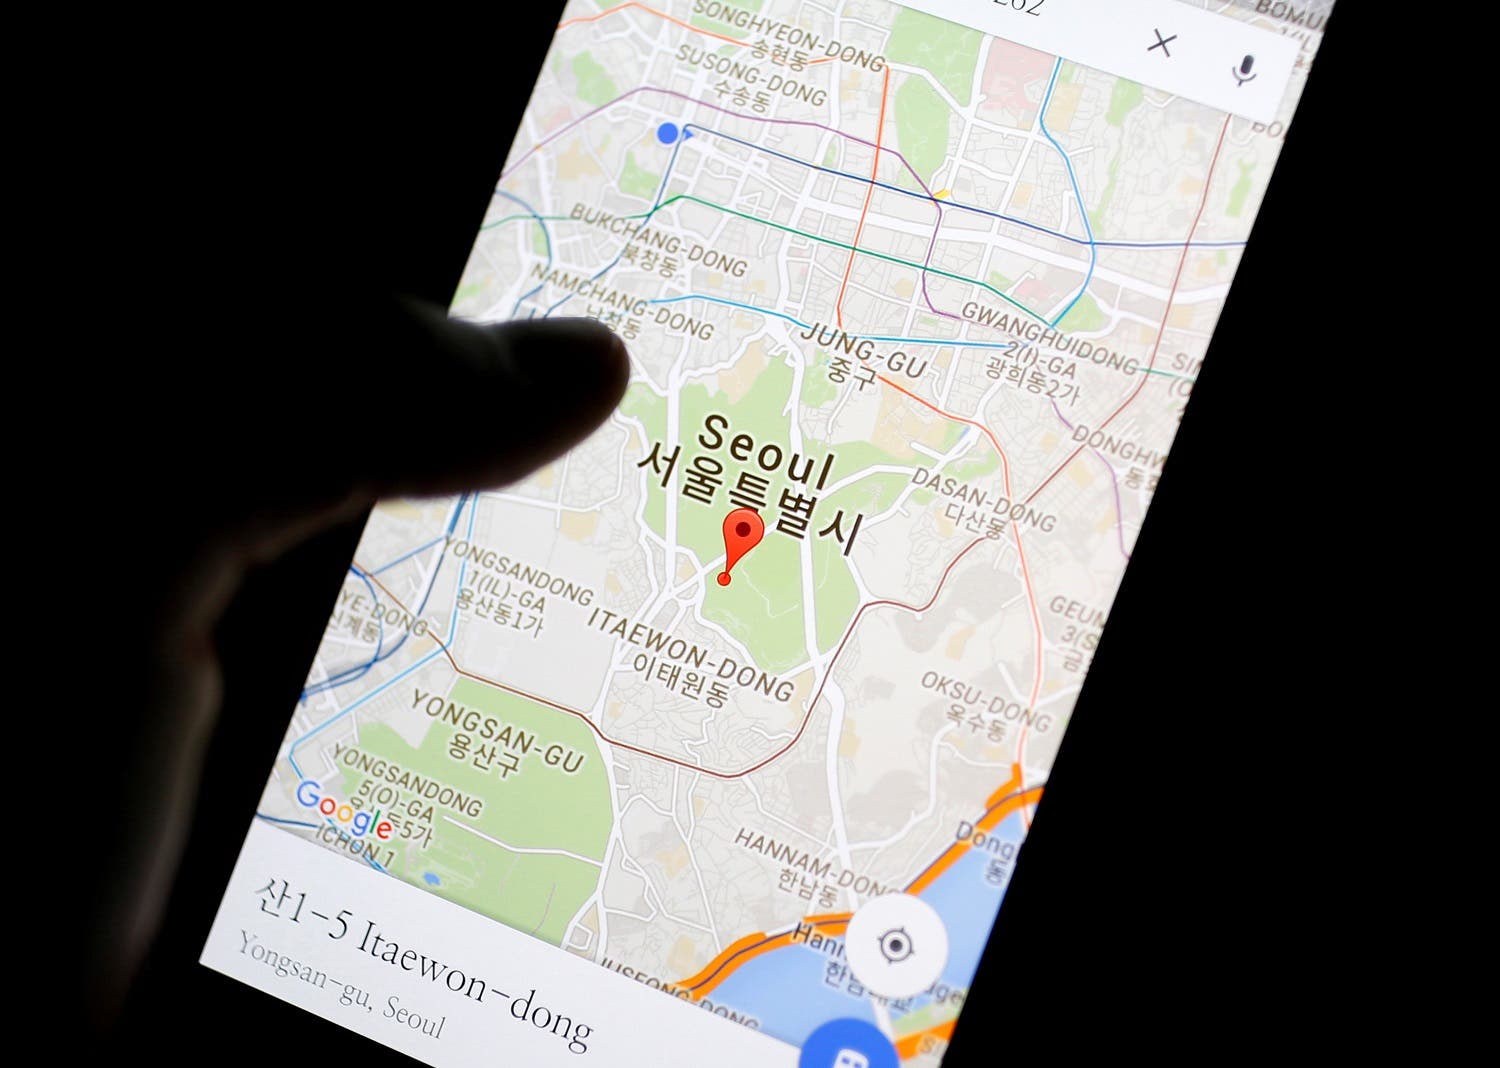 Google Maps application is displayed on a smartphone in Seoul, South Korea, in this photo illustration on August 24, 2016. (Reuters)